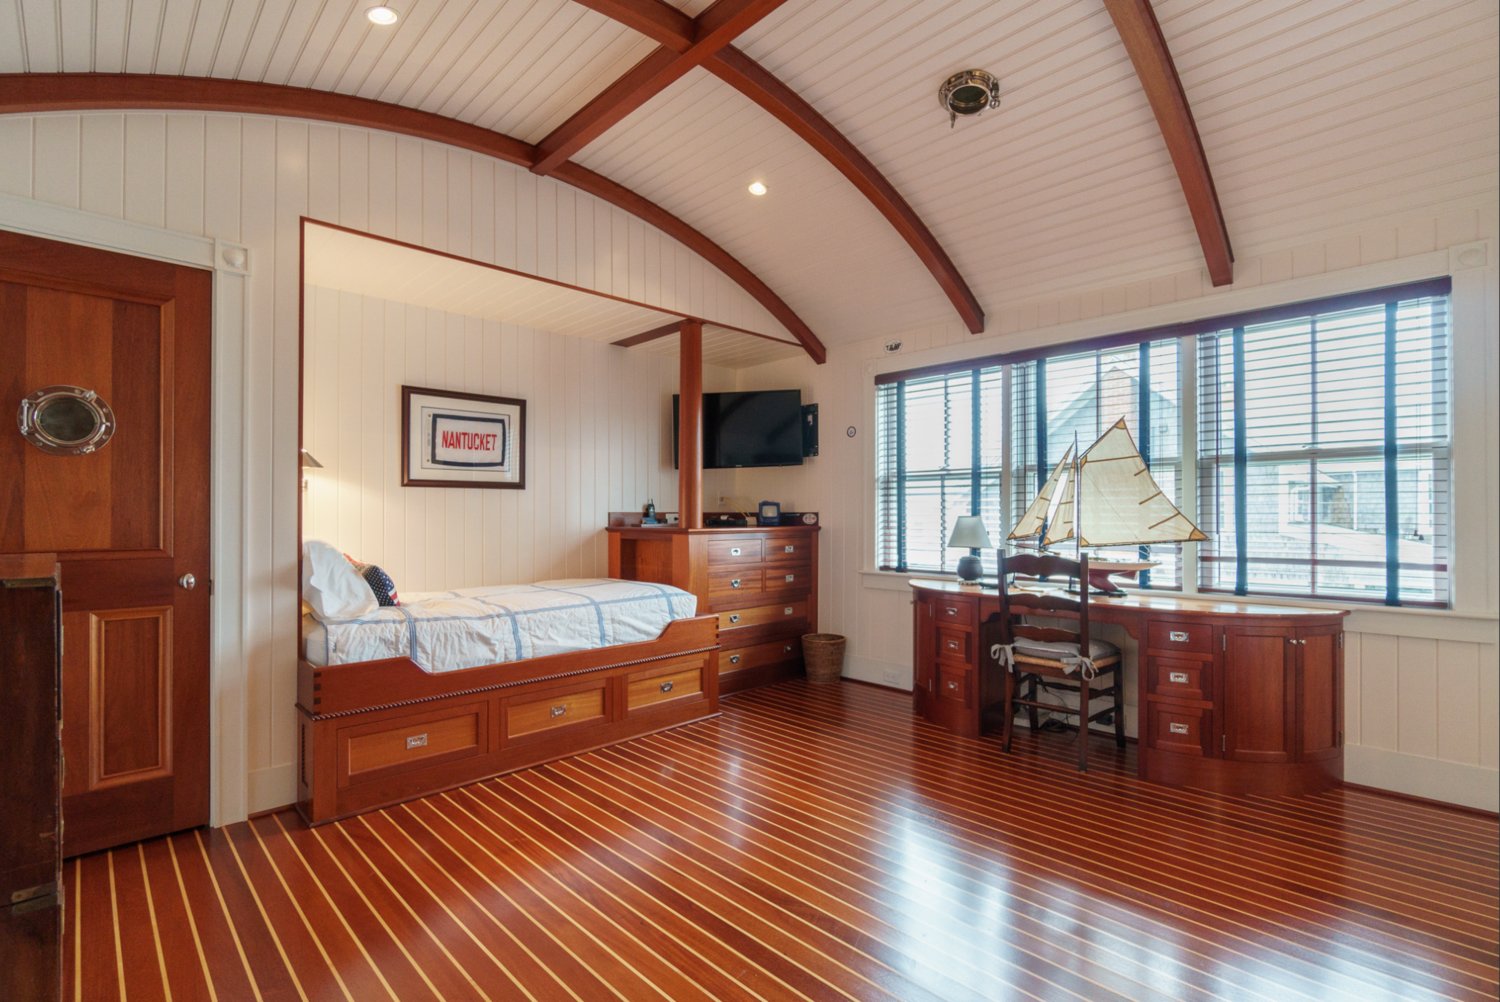 This nautically-inspired bedroom has a barrel ceiling.